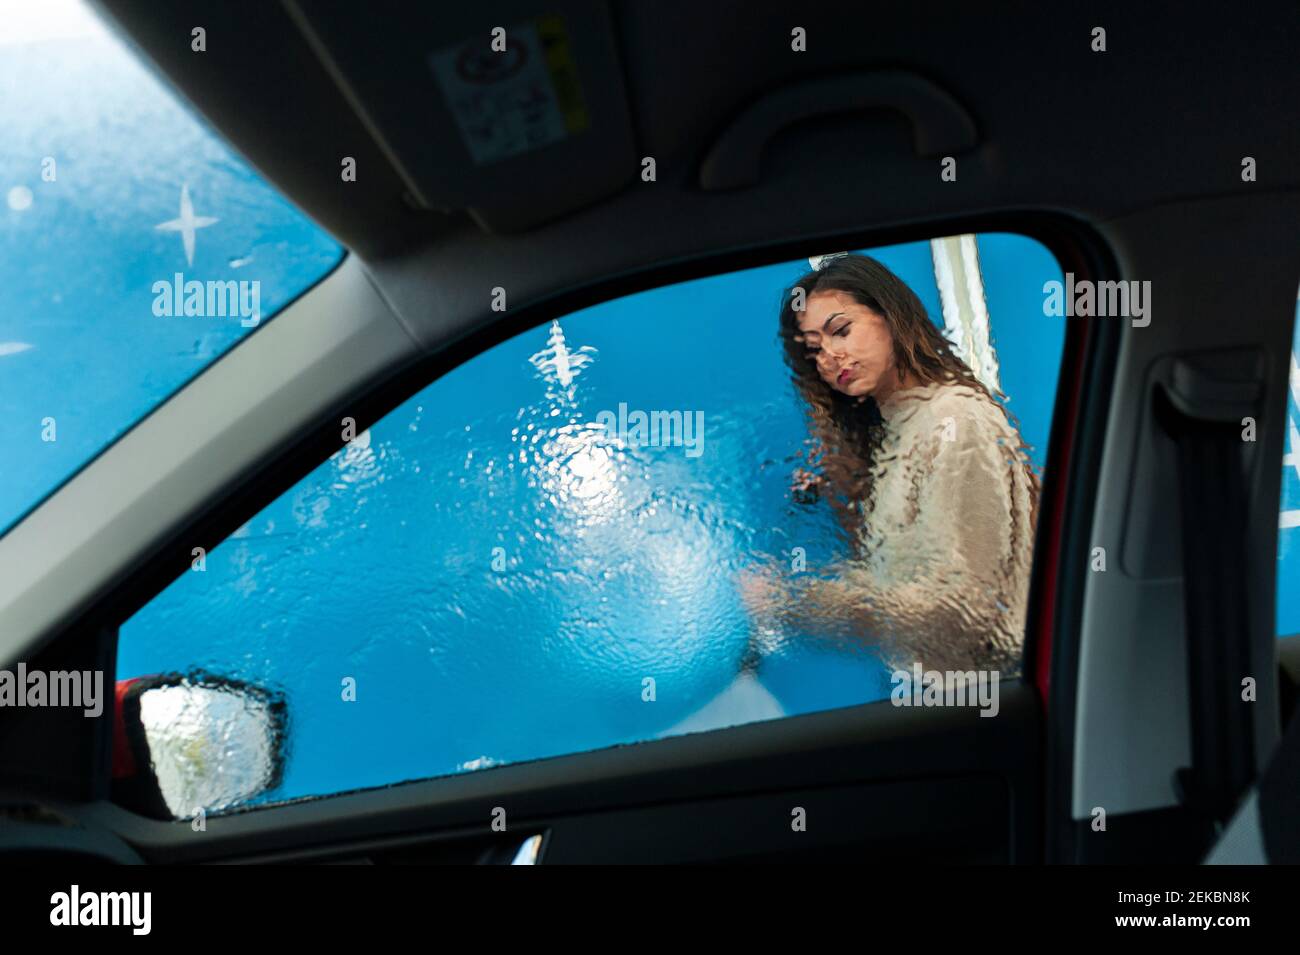 Young woman spraying water on window at car wash Stock Photo